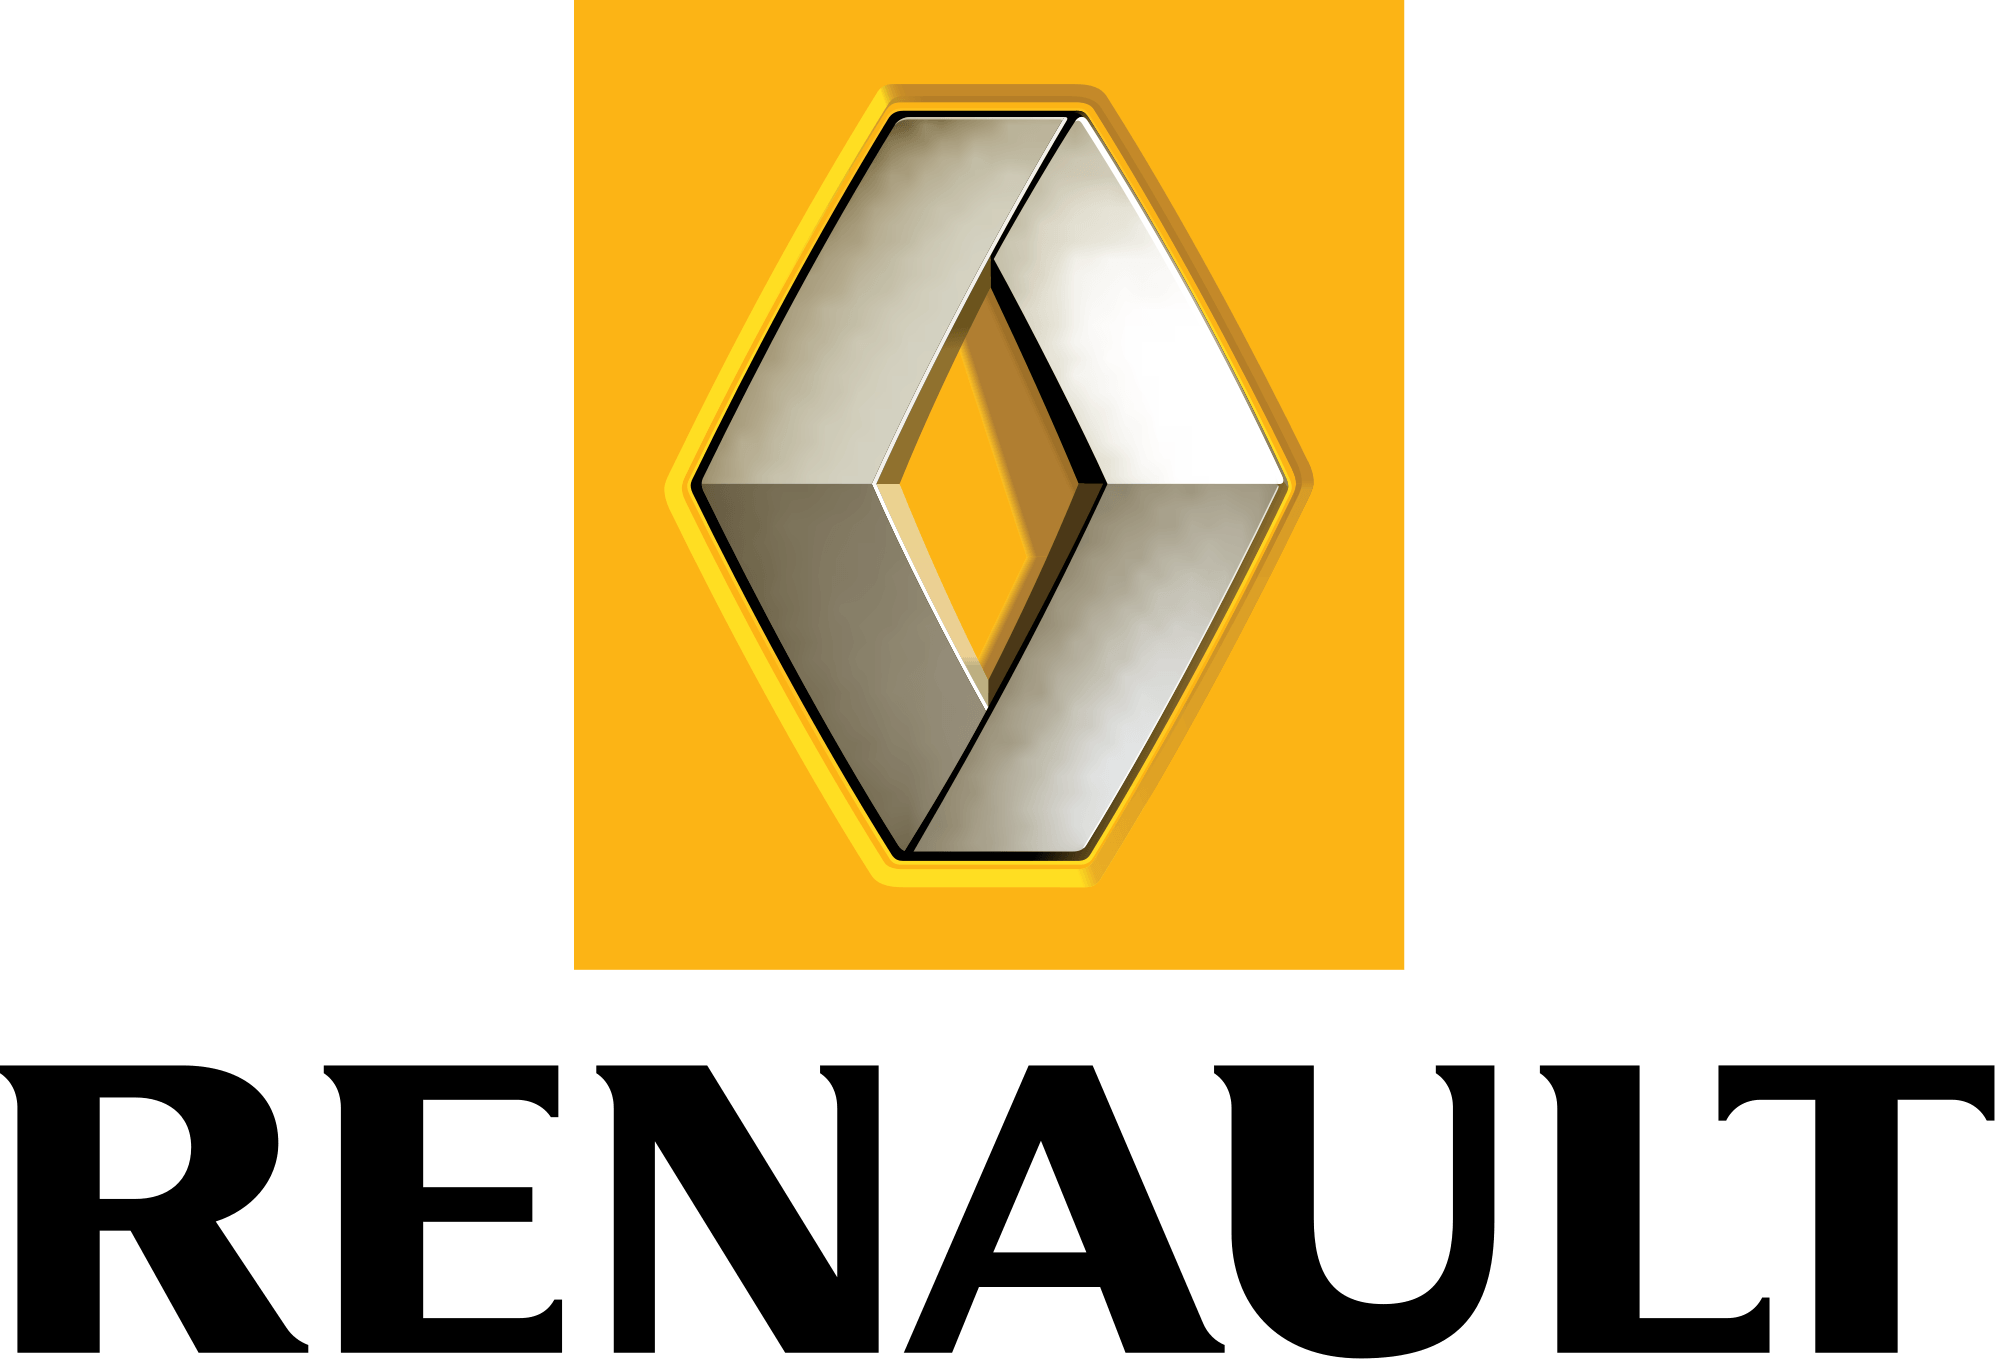 French Diamond Car Logo - Renault Logo, Renault Car Symbol Meaning and History | Car Brand ...